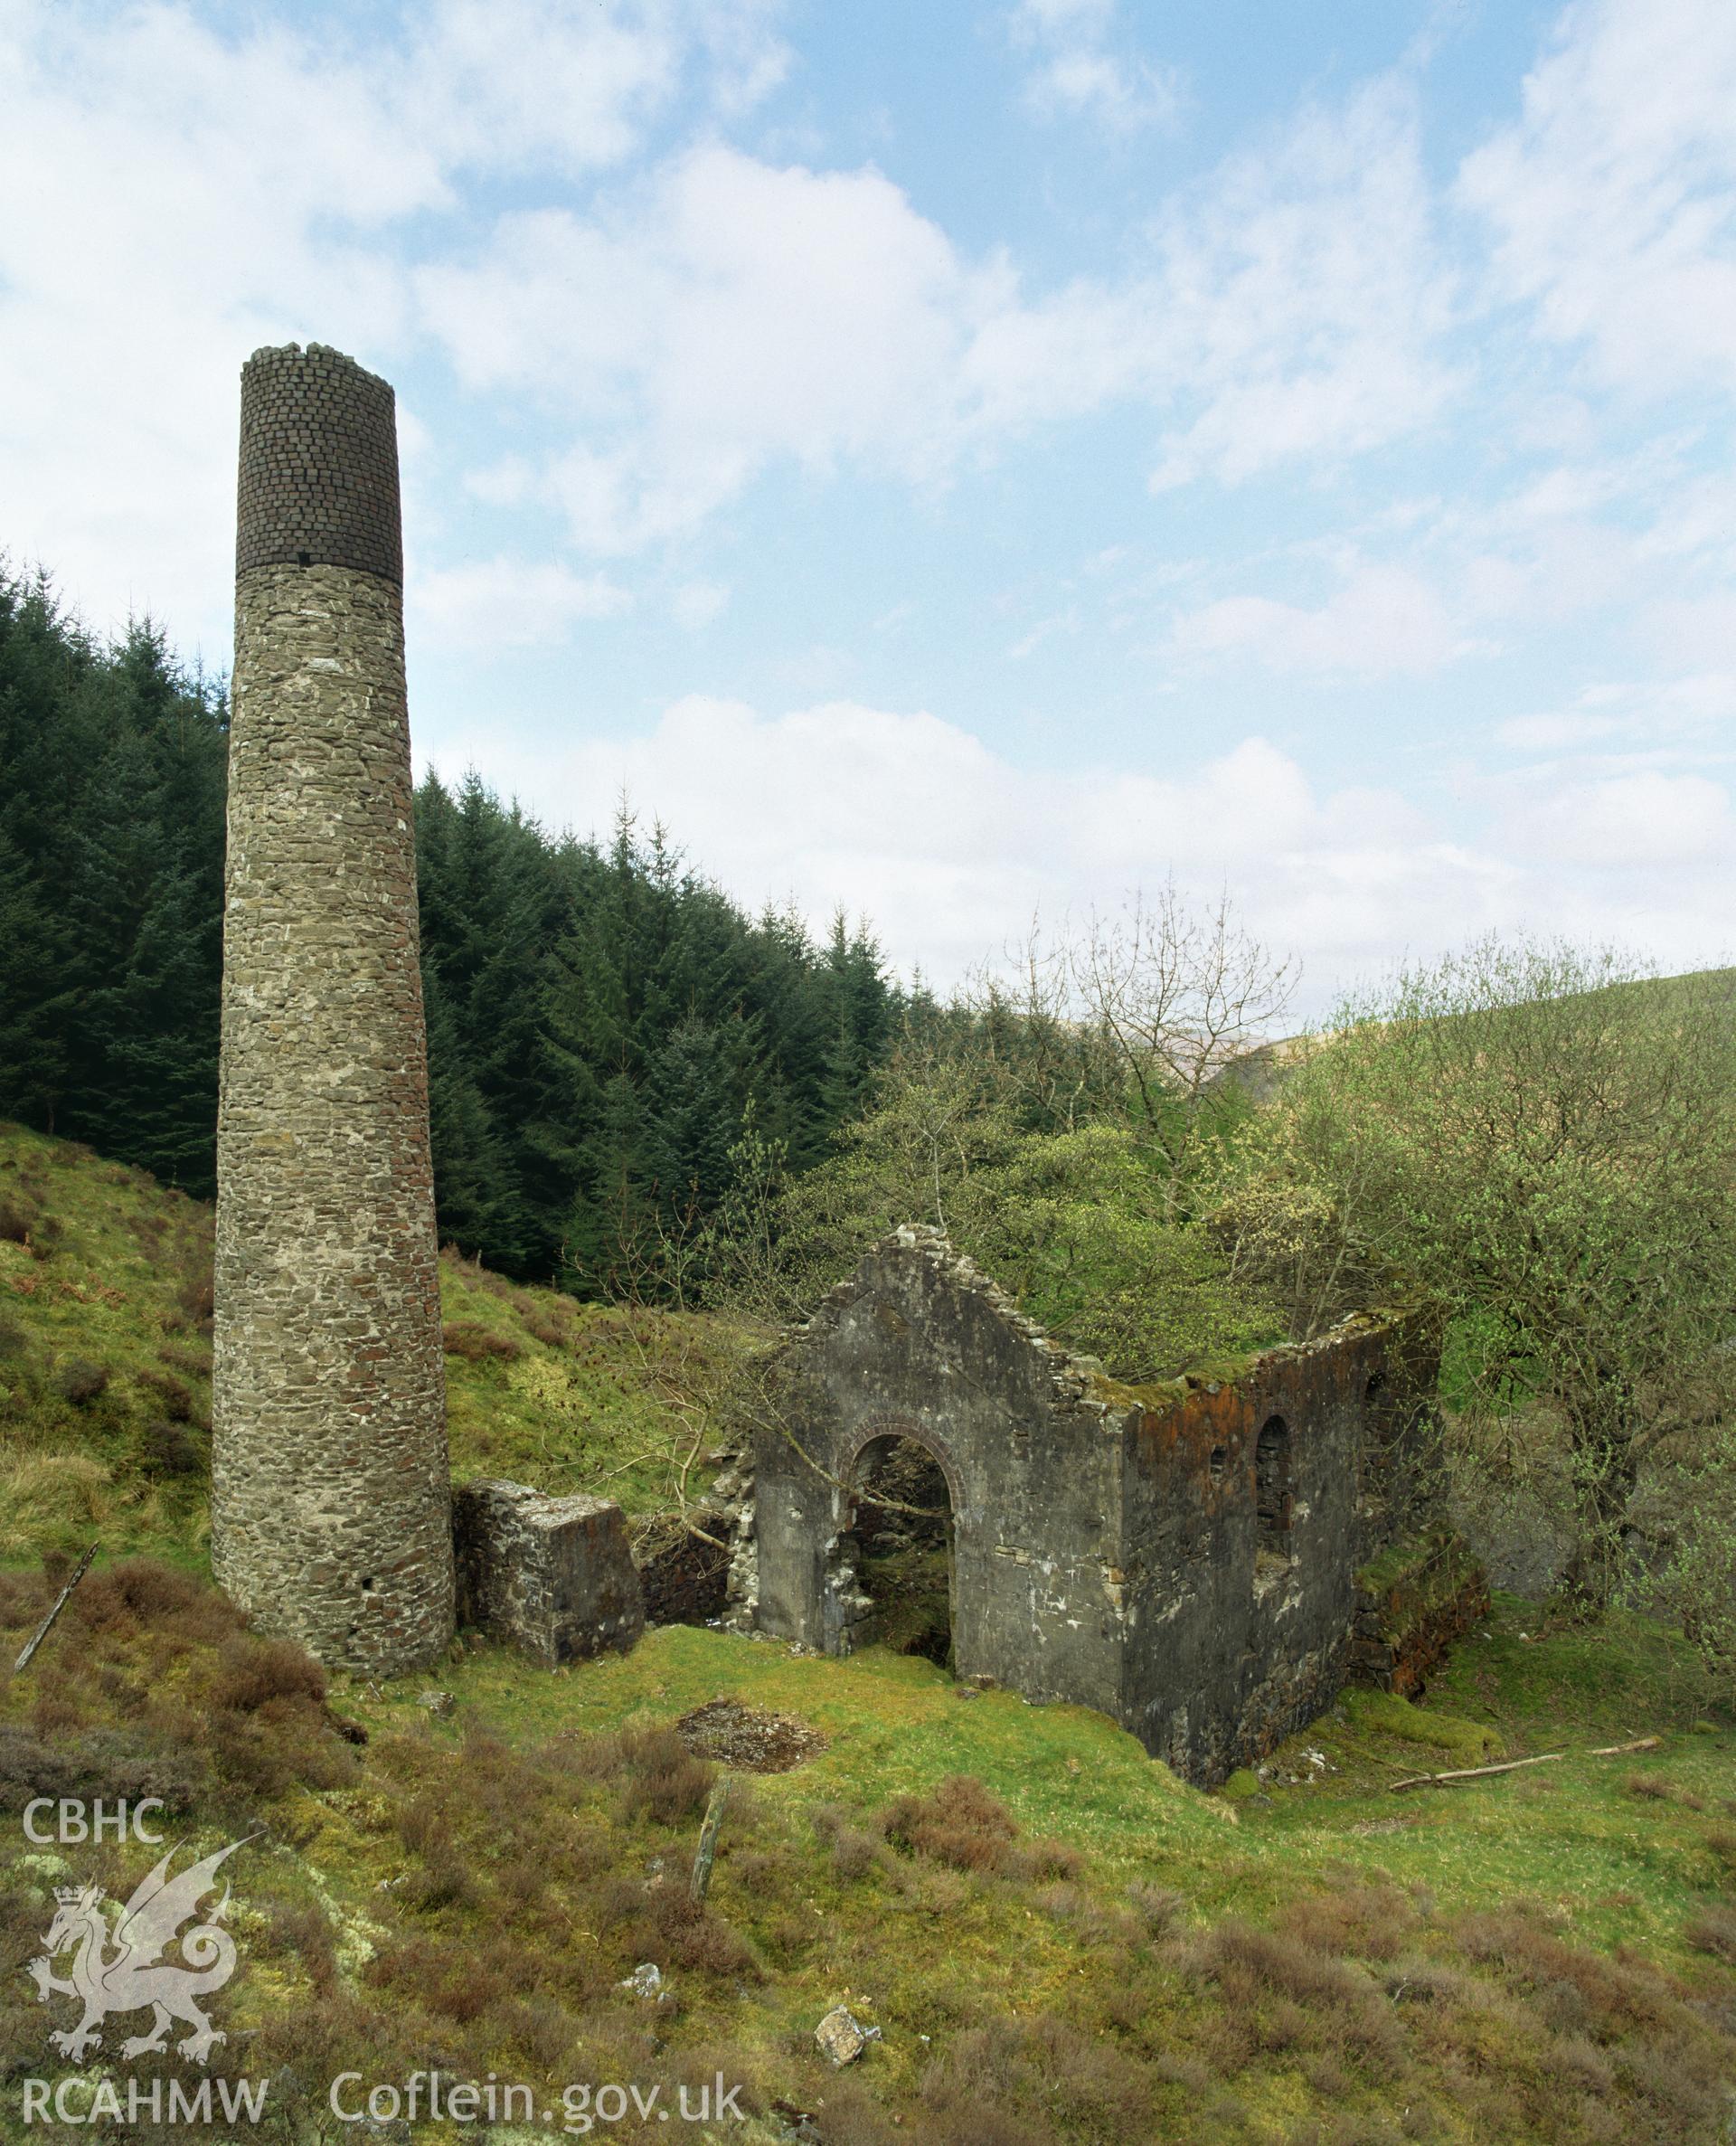 Colour transparency showing the engine house at Rhandirmwyn Lead Mine, produced by Iain Wright, June 2004